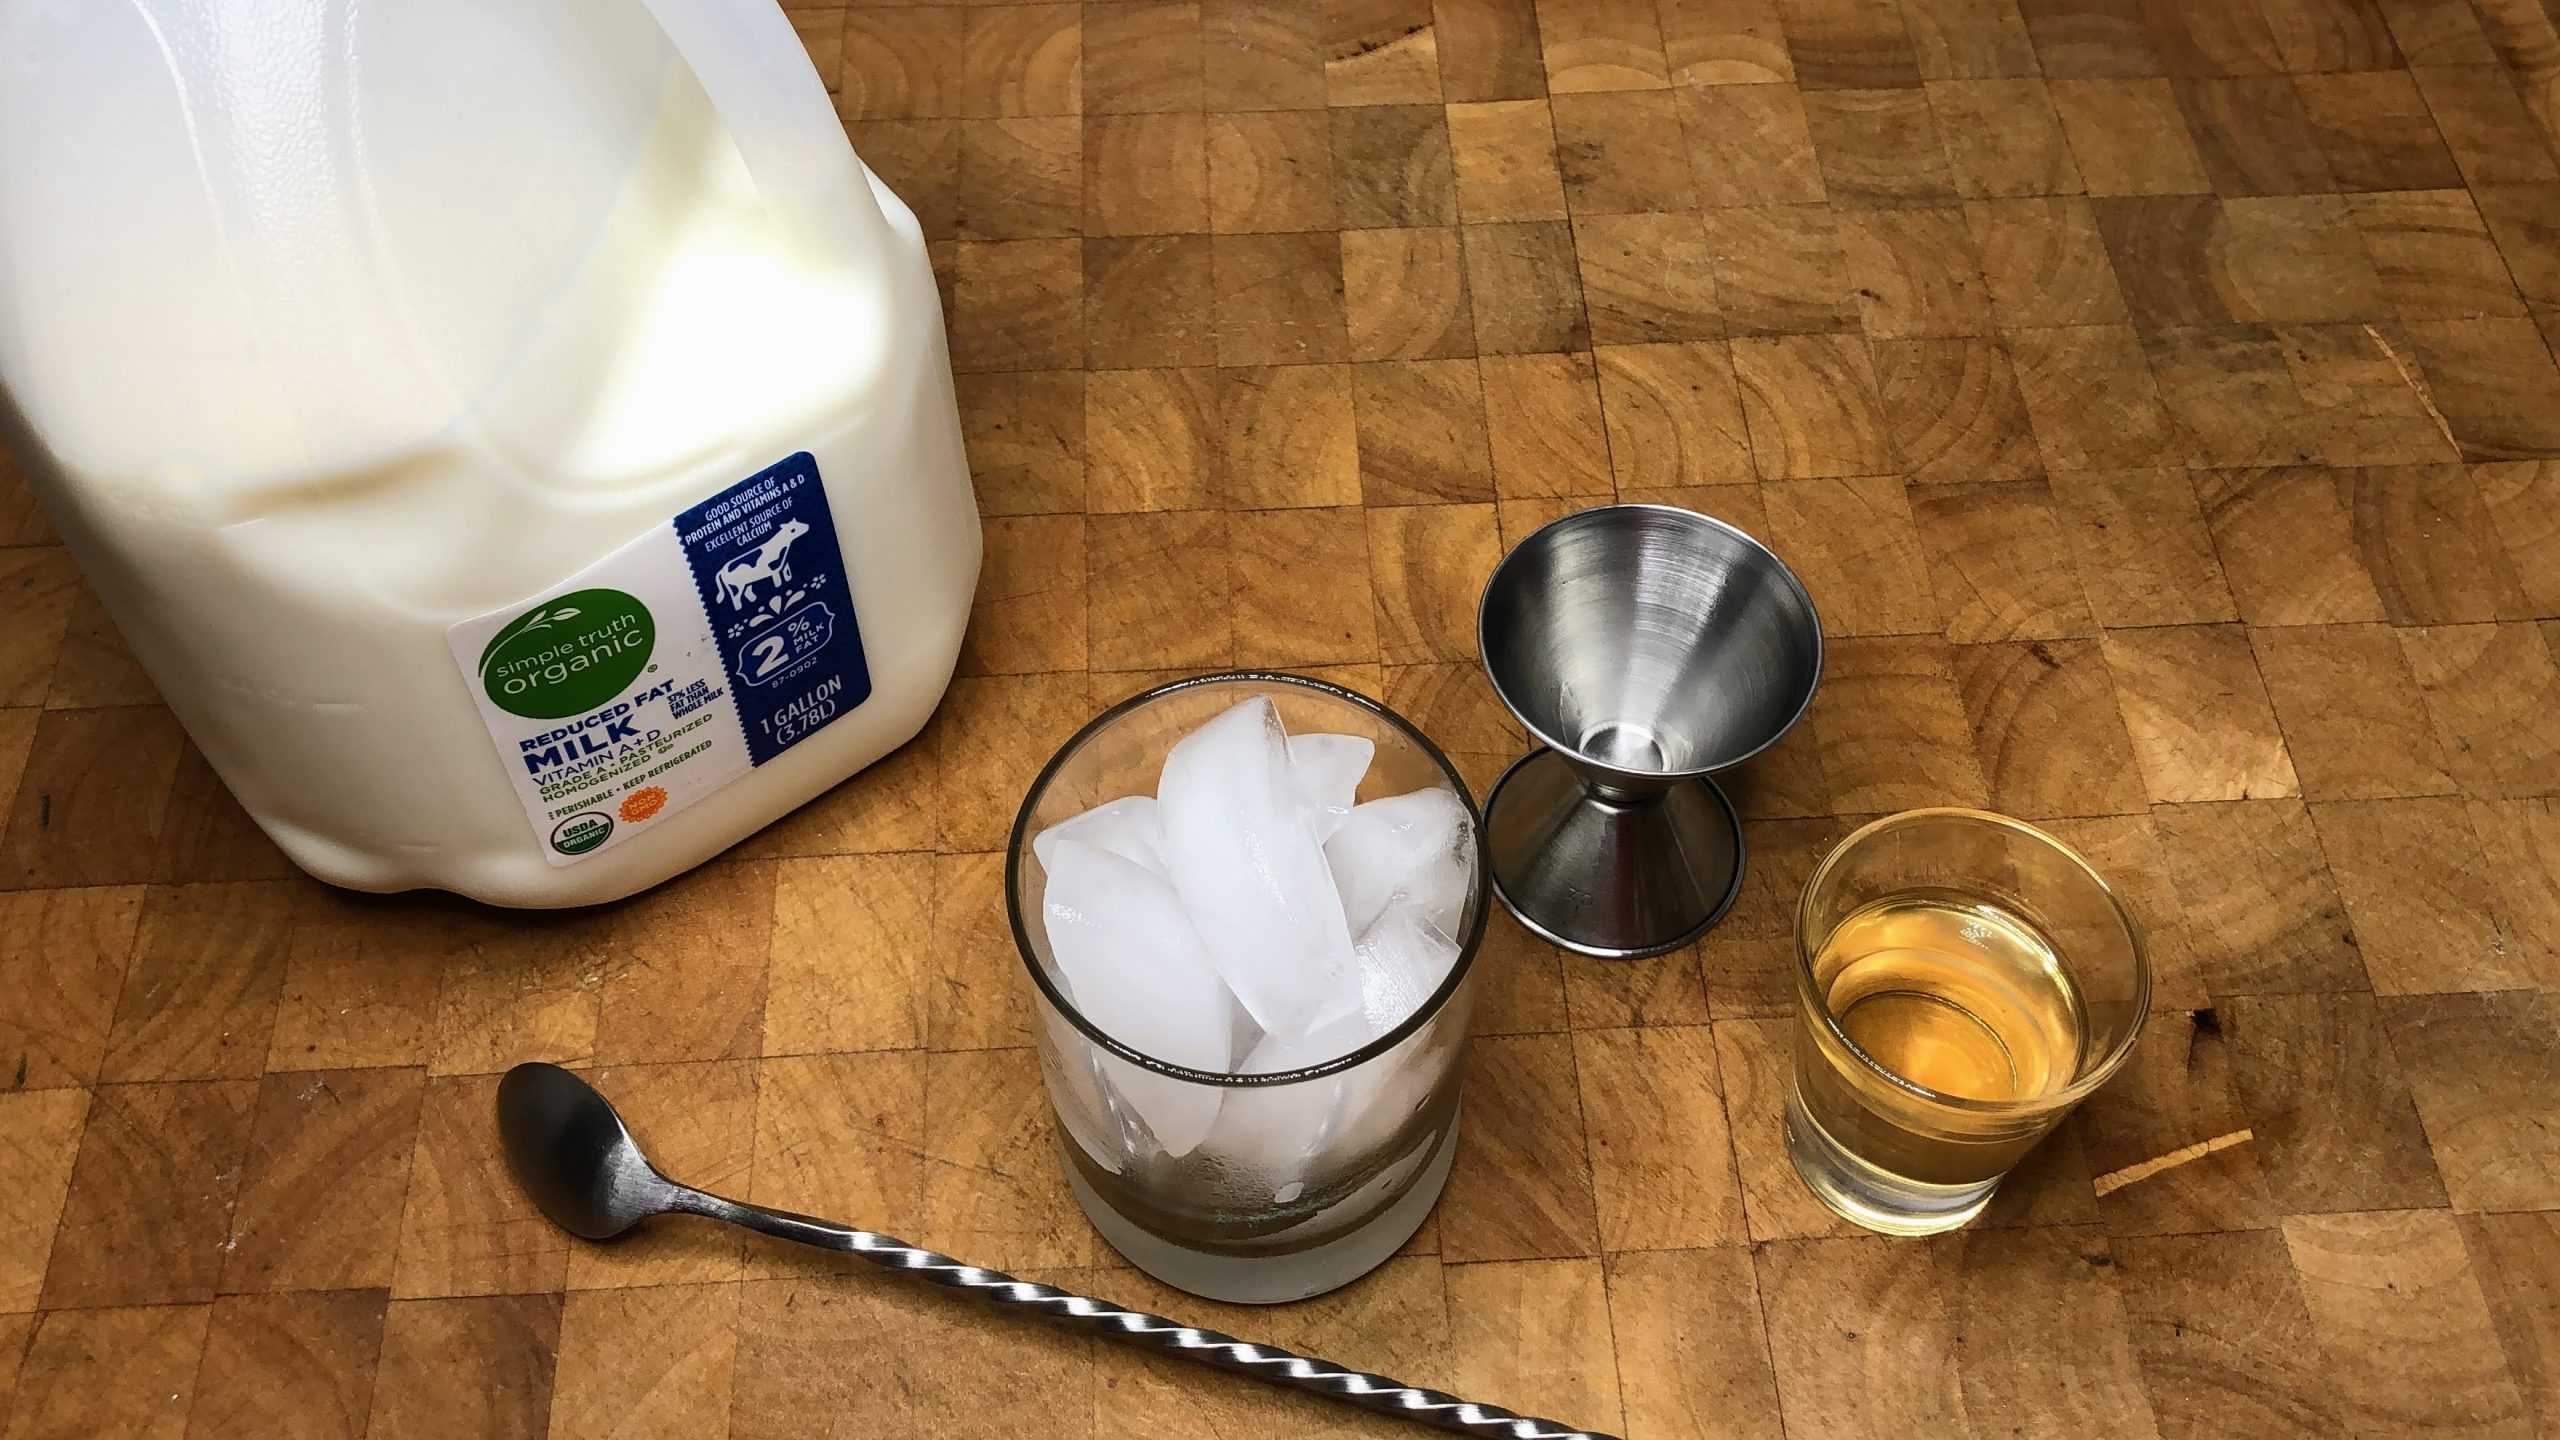 Vanilla simple syrup and milk next to a bar spoon, jigger and rocks glass filled with ice.